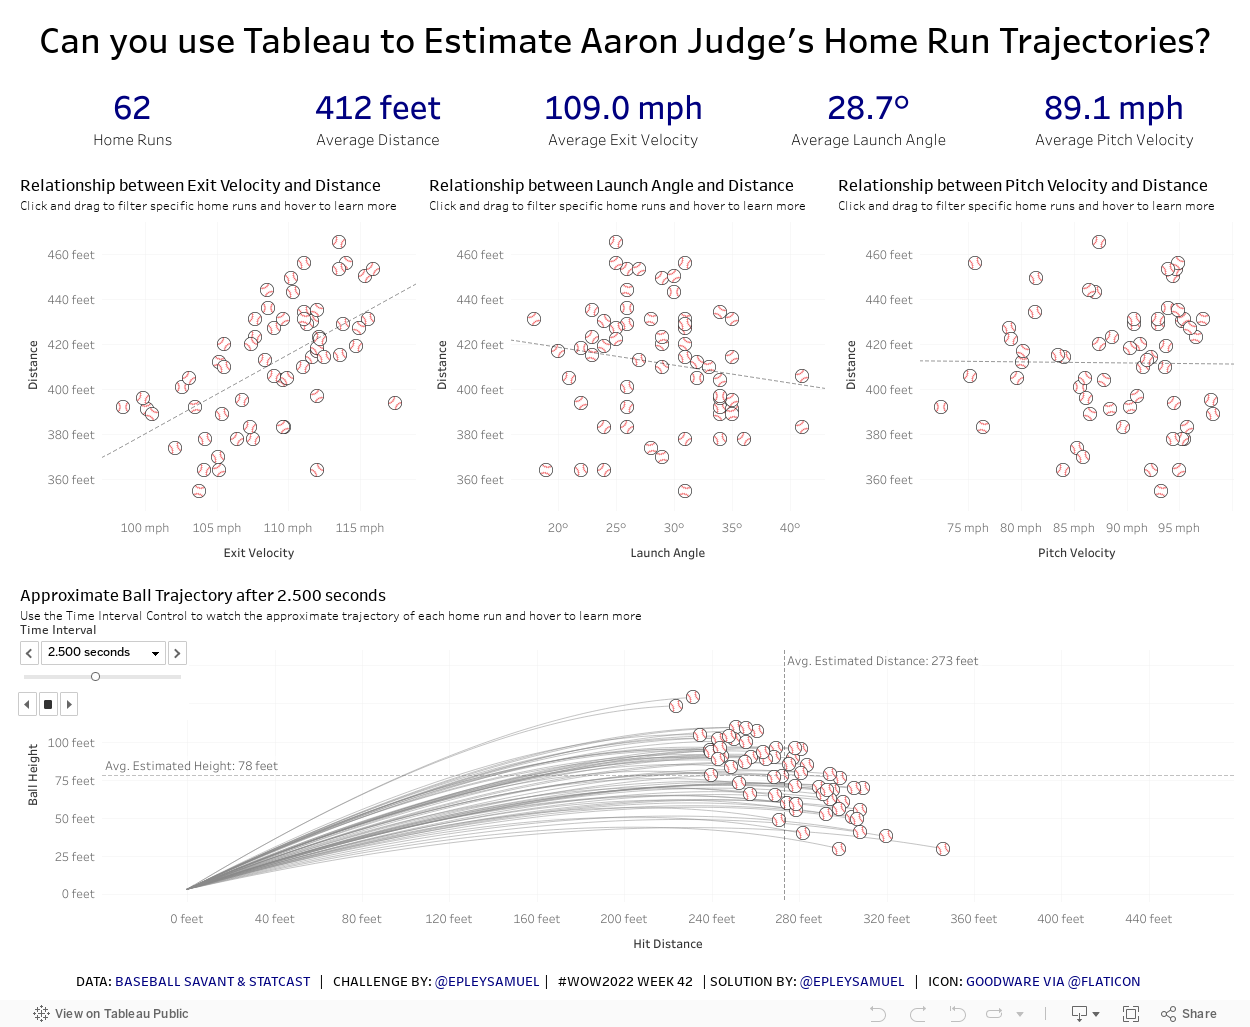 #WOW2022 Week 42: Can you use Tableau to Estimate Aaron Judge's Home Run Trajectories? 